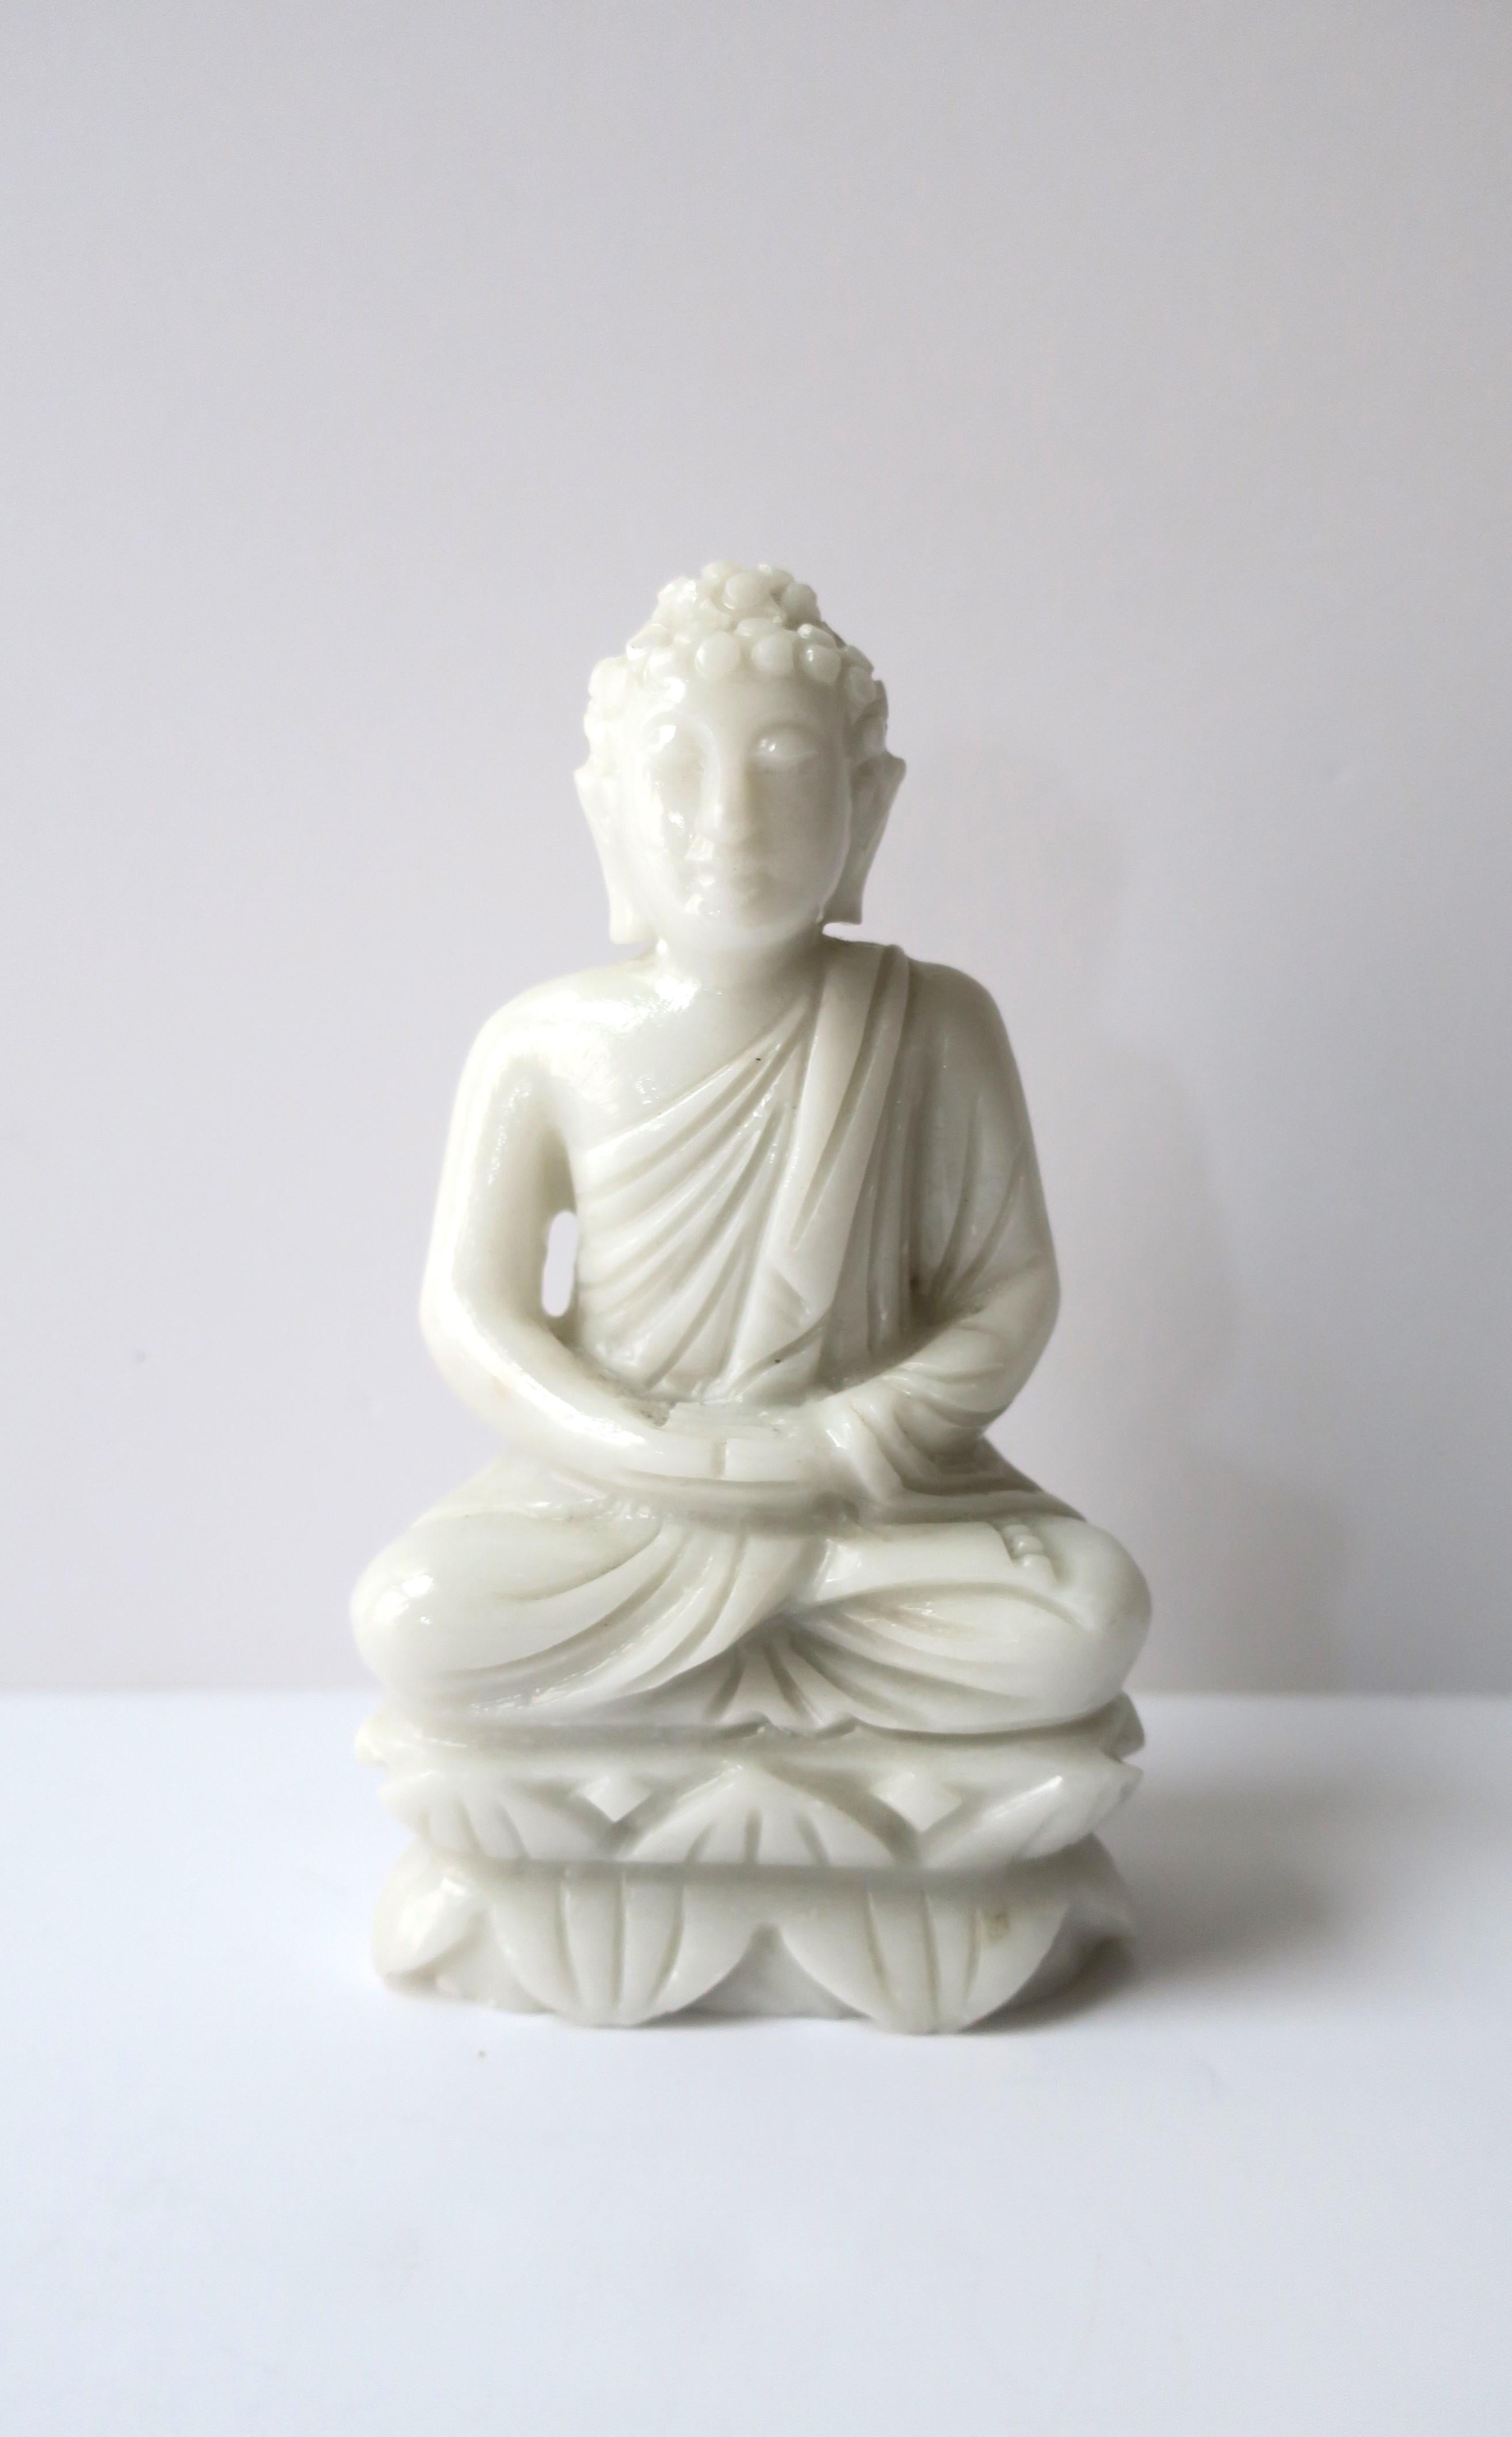 A milk glass Buddha statue sitting in meditating position with lotus leaves surrounding base, circa mid-20th century. There are several special characteristics of a Buddha; specific to this Buddha they include long earlobes. Buddha is adorned with a